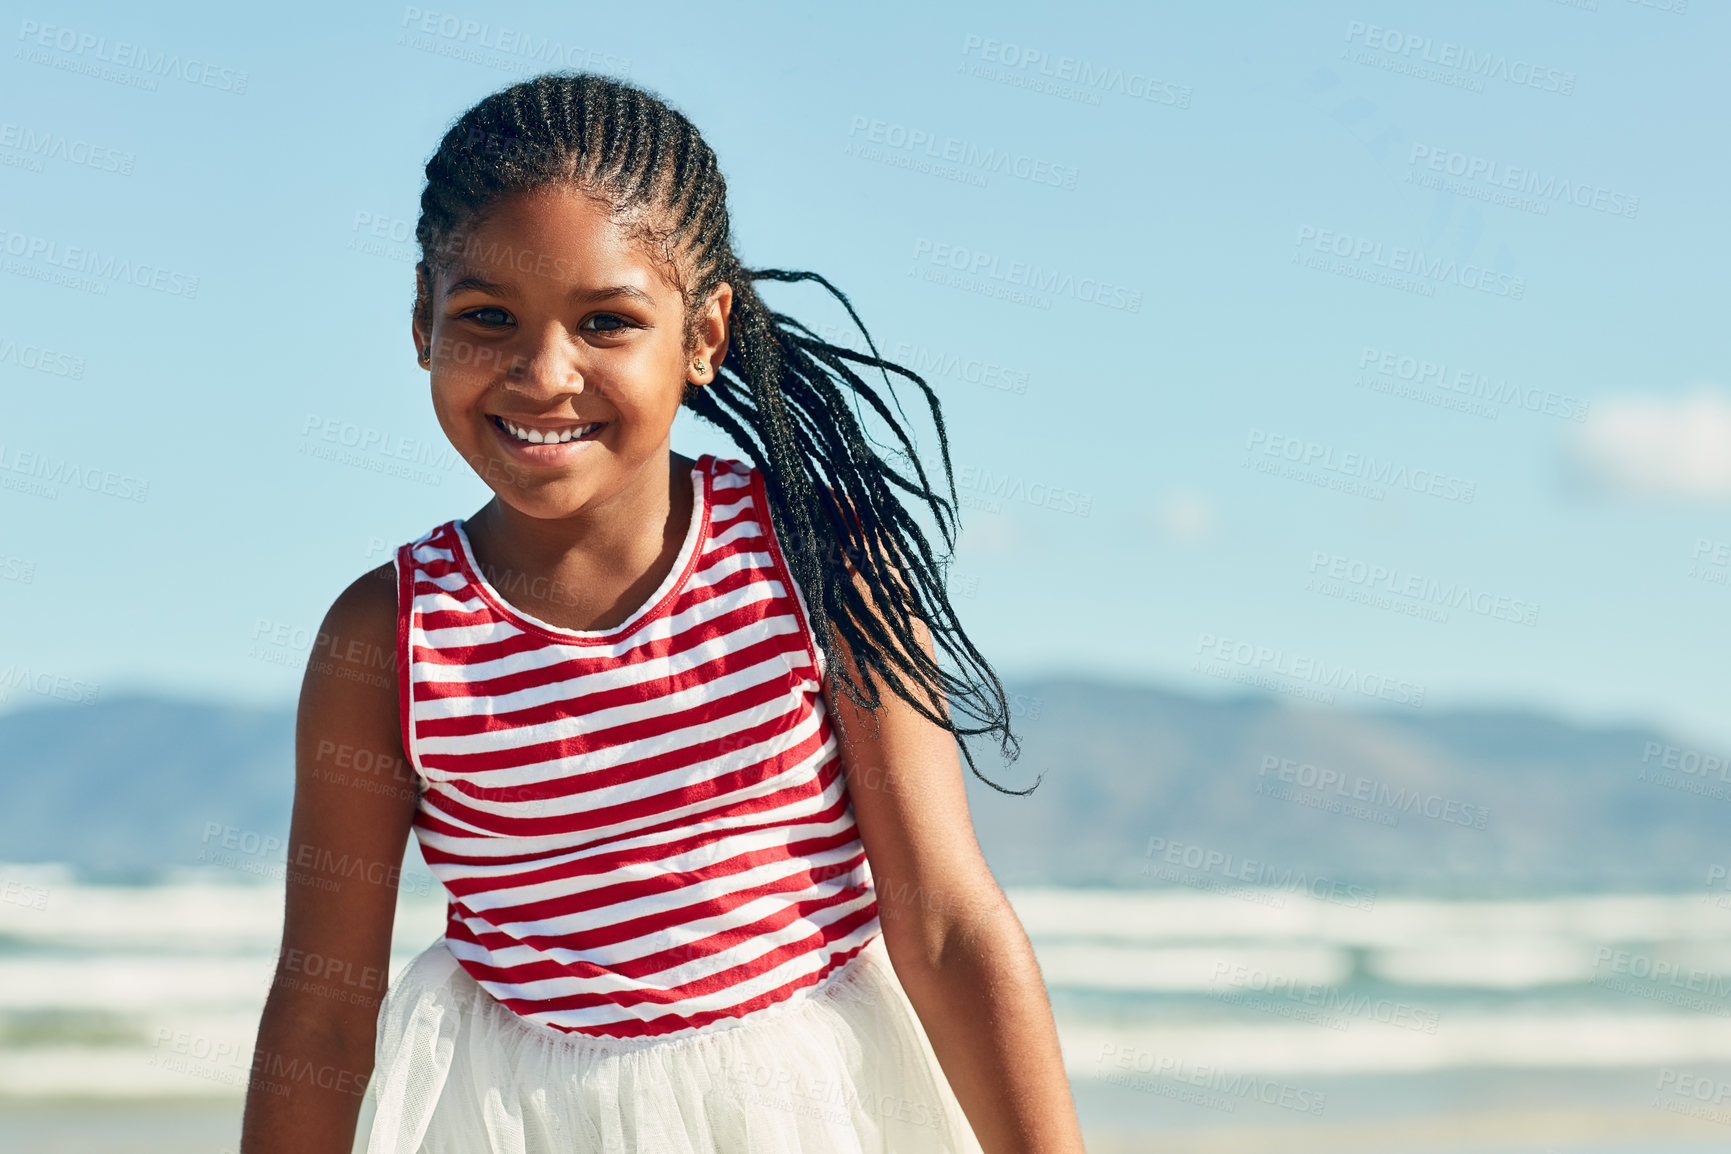 Buy stock photo Portrait of an adorable little girl having fun at the beach